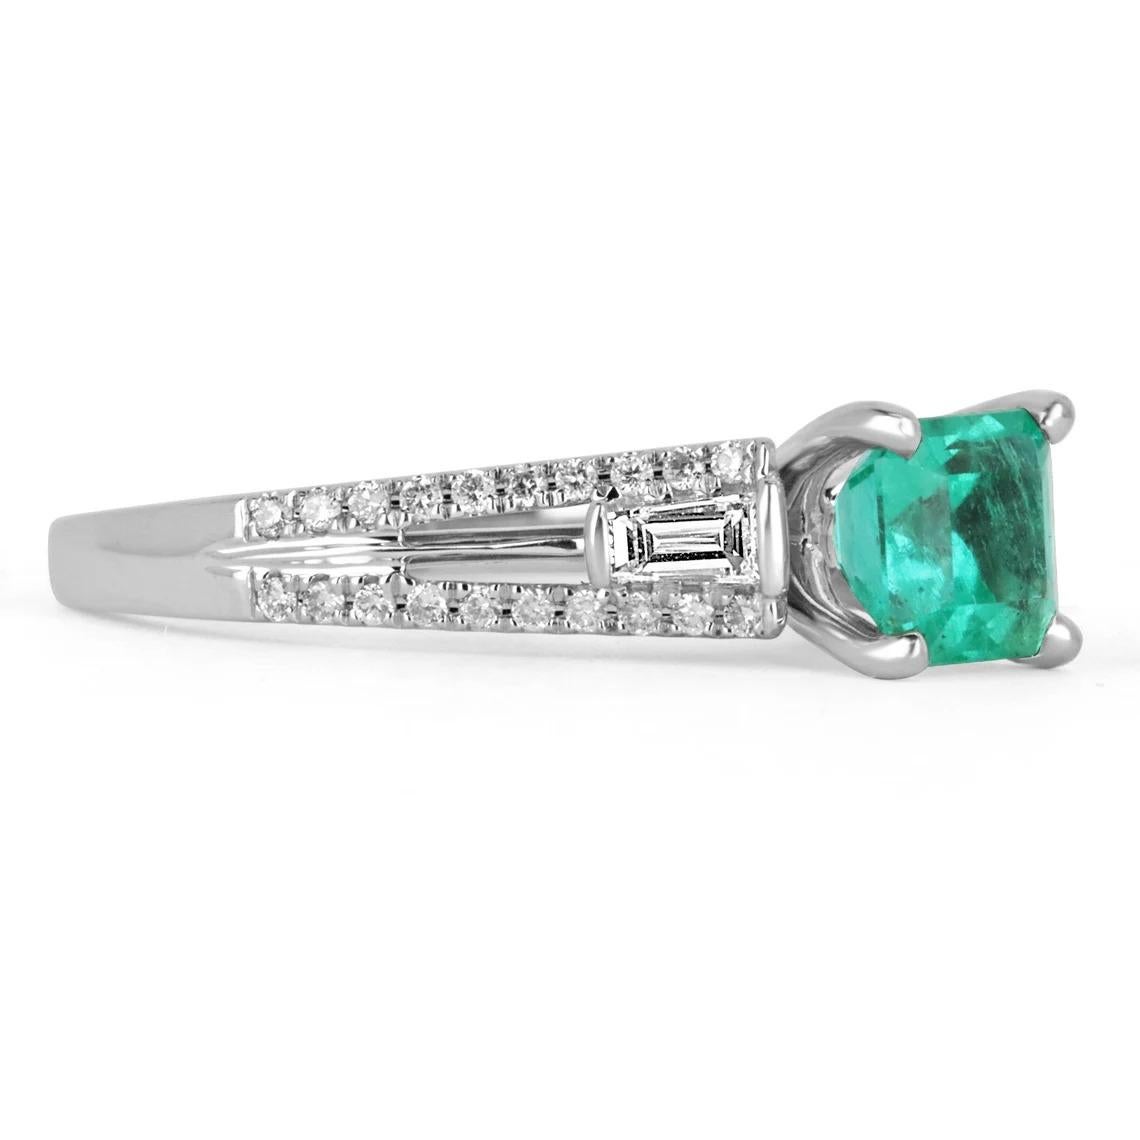 Elegantly displayed is a natural, Emerald cut Colombian emerald and diamond accent engagement ring. The center gem is a fine quality, Asscher cut, emerald filled with life and brilliance! Among the emeralds, impressive qualities are its vibrant